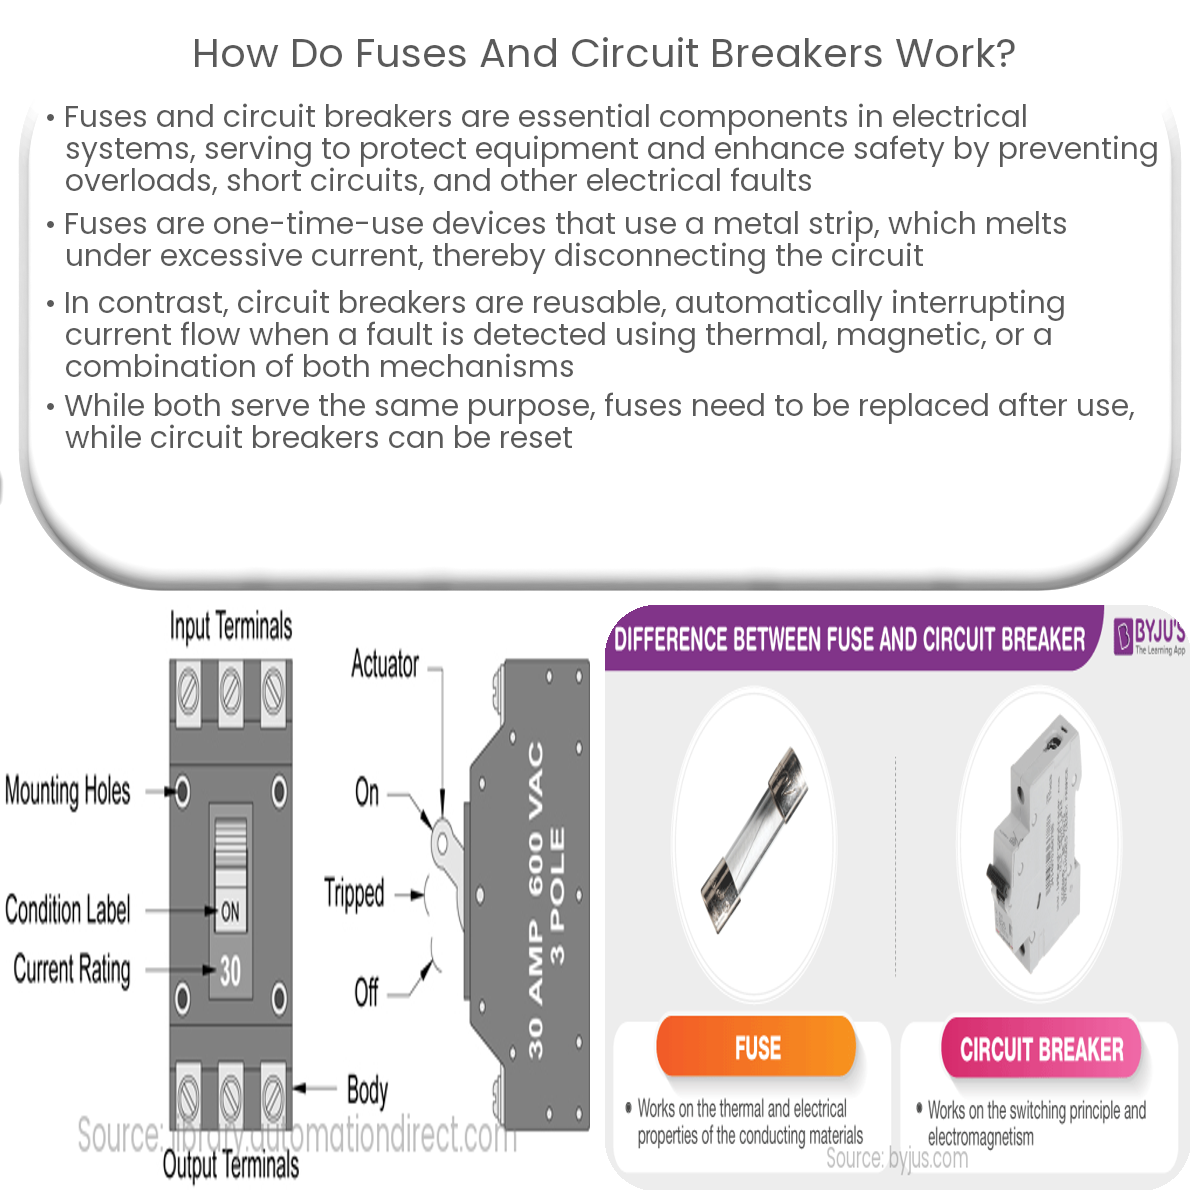 How do fuses and circuit breakers work?